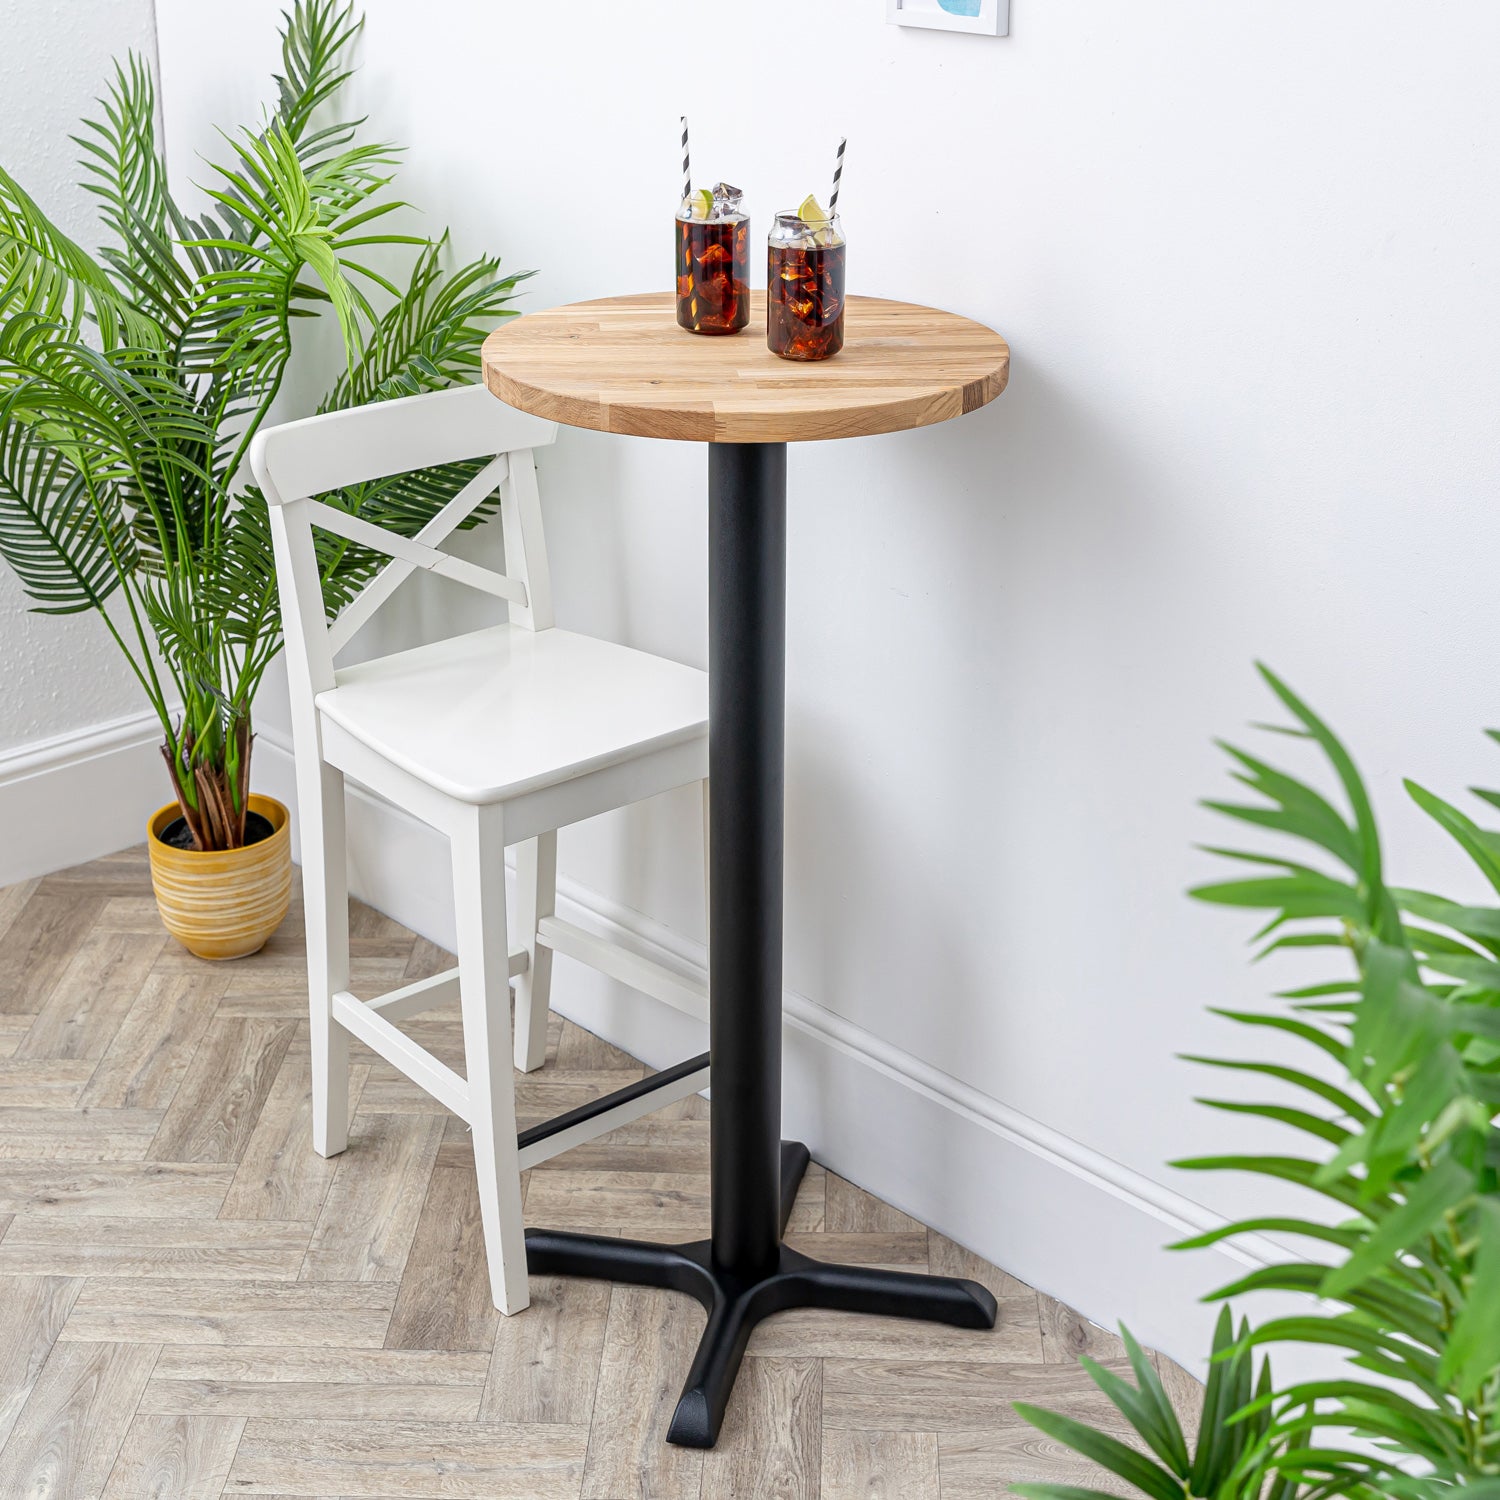 Oak Solid Wood Tall Round Bistro Table